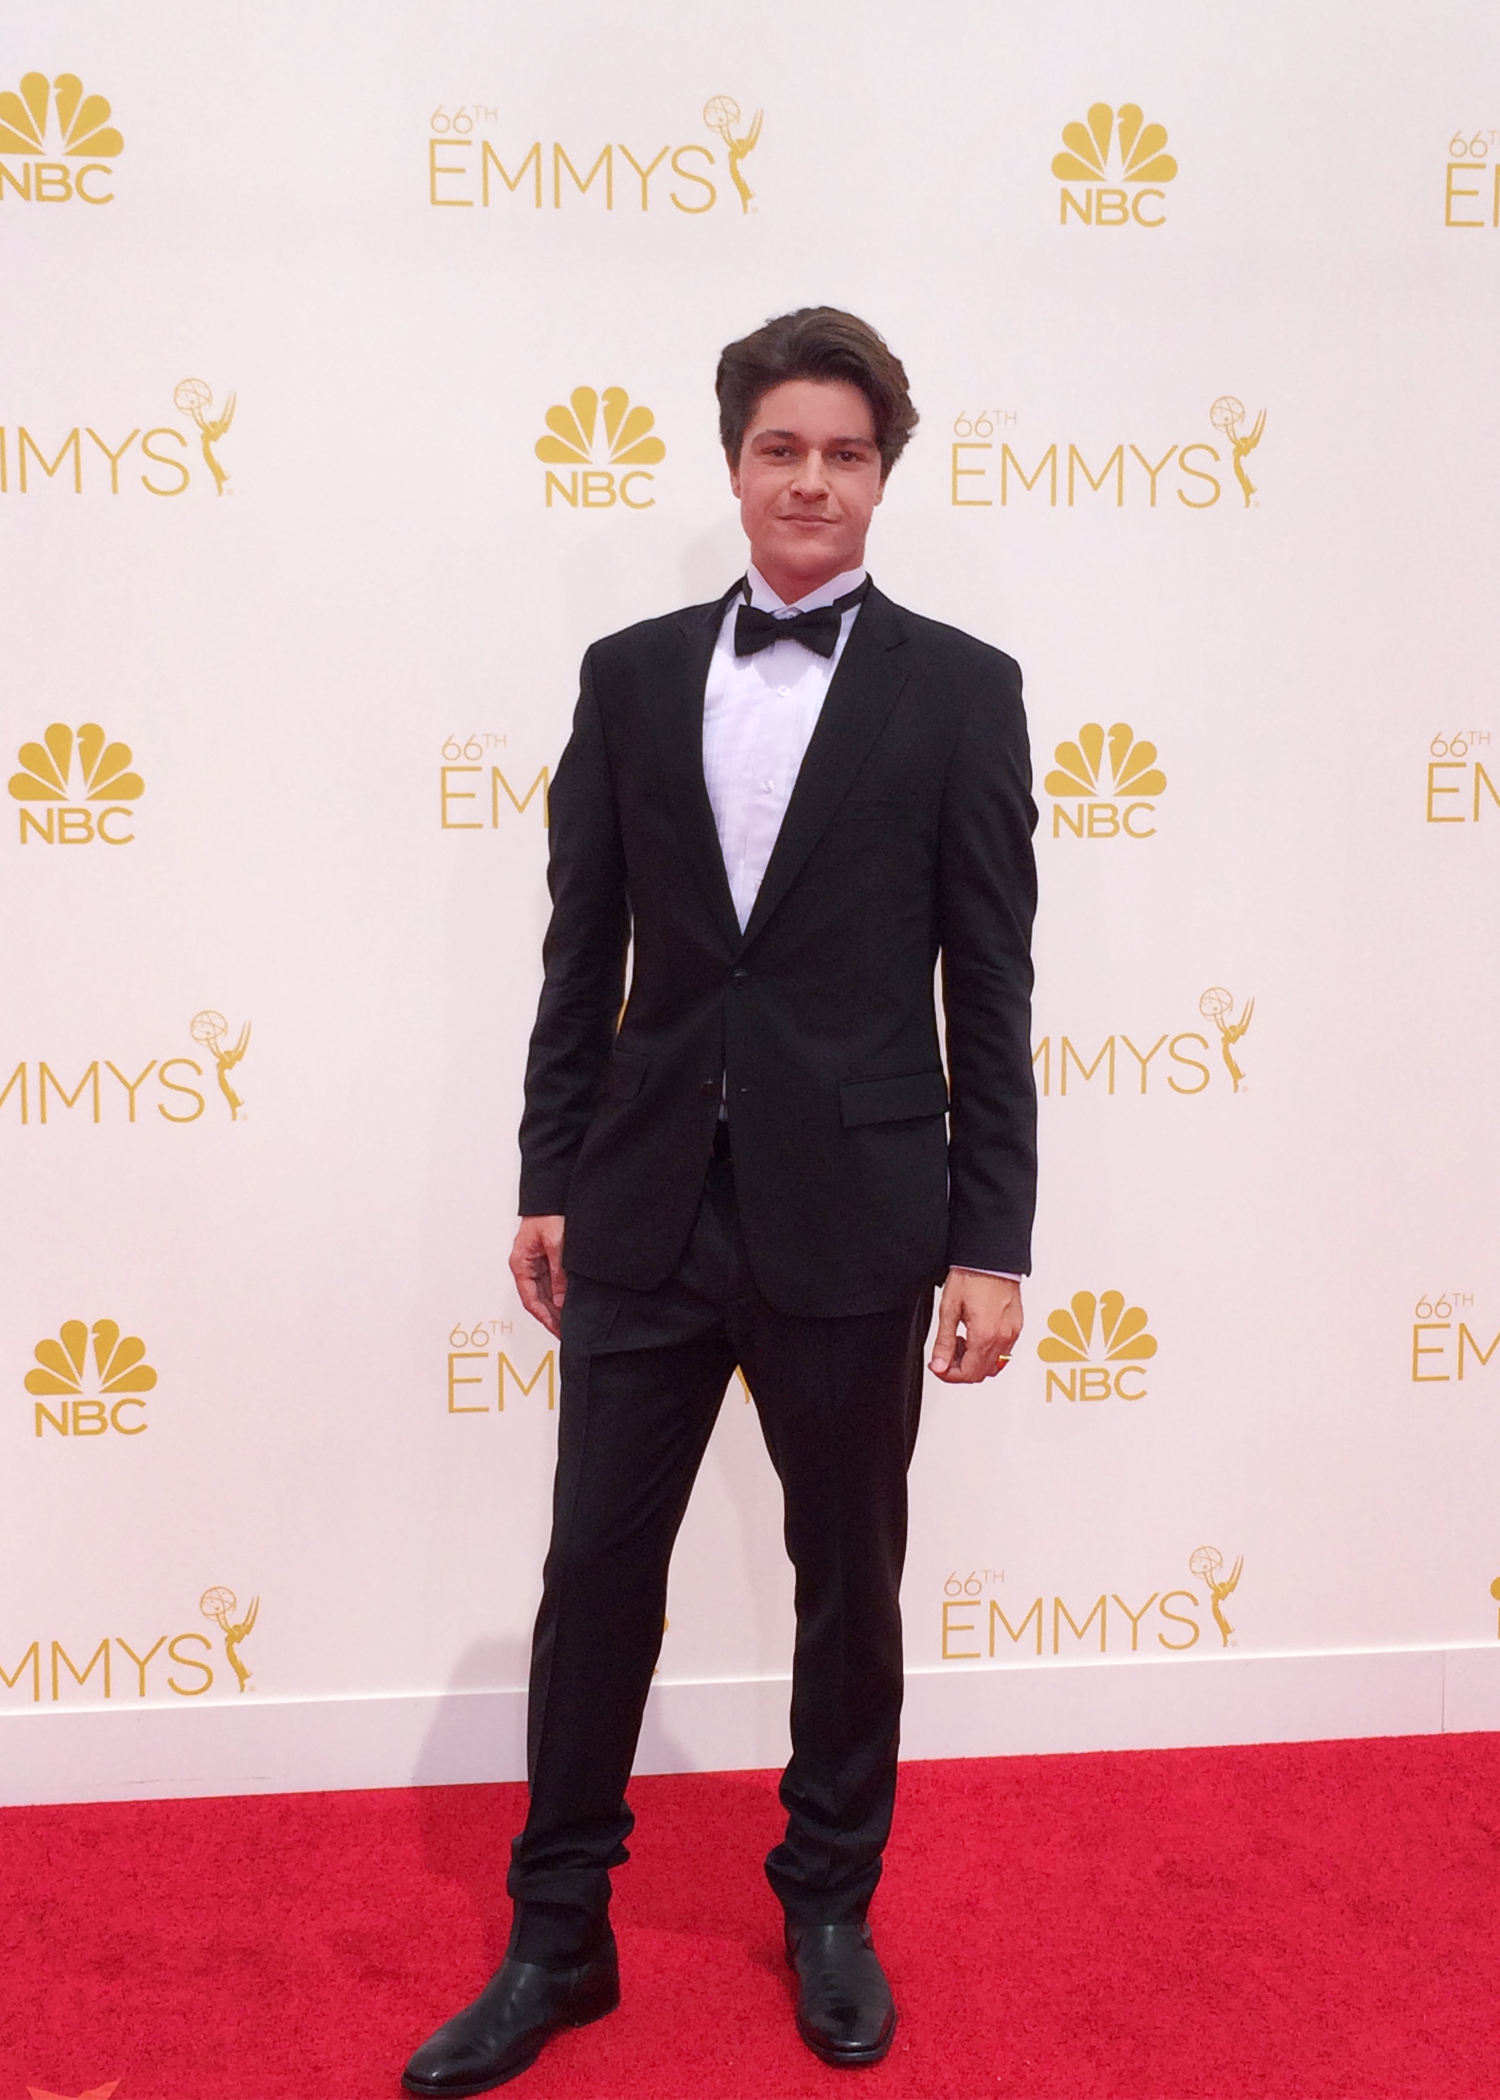 Nicolas Wendl at event of The 66th Primetime Emmy Awards (2014)